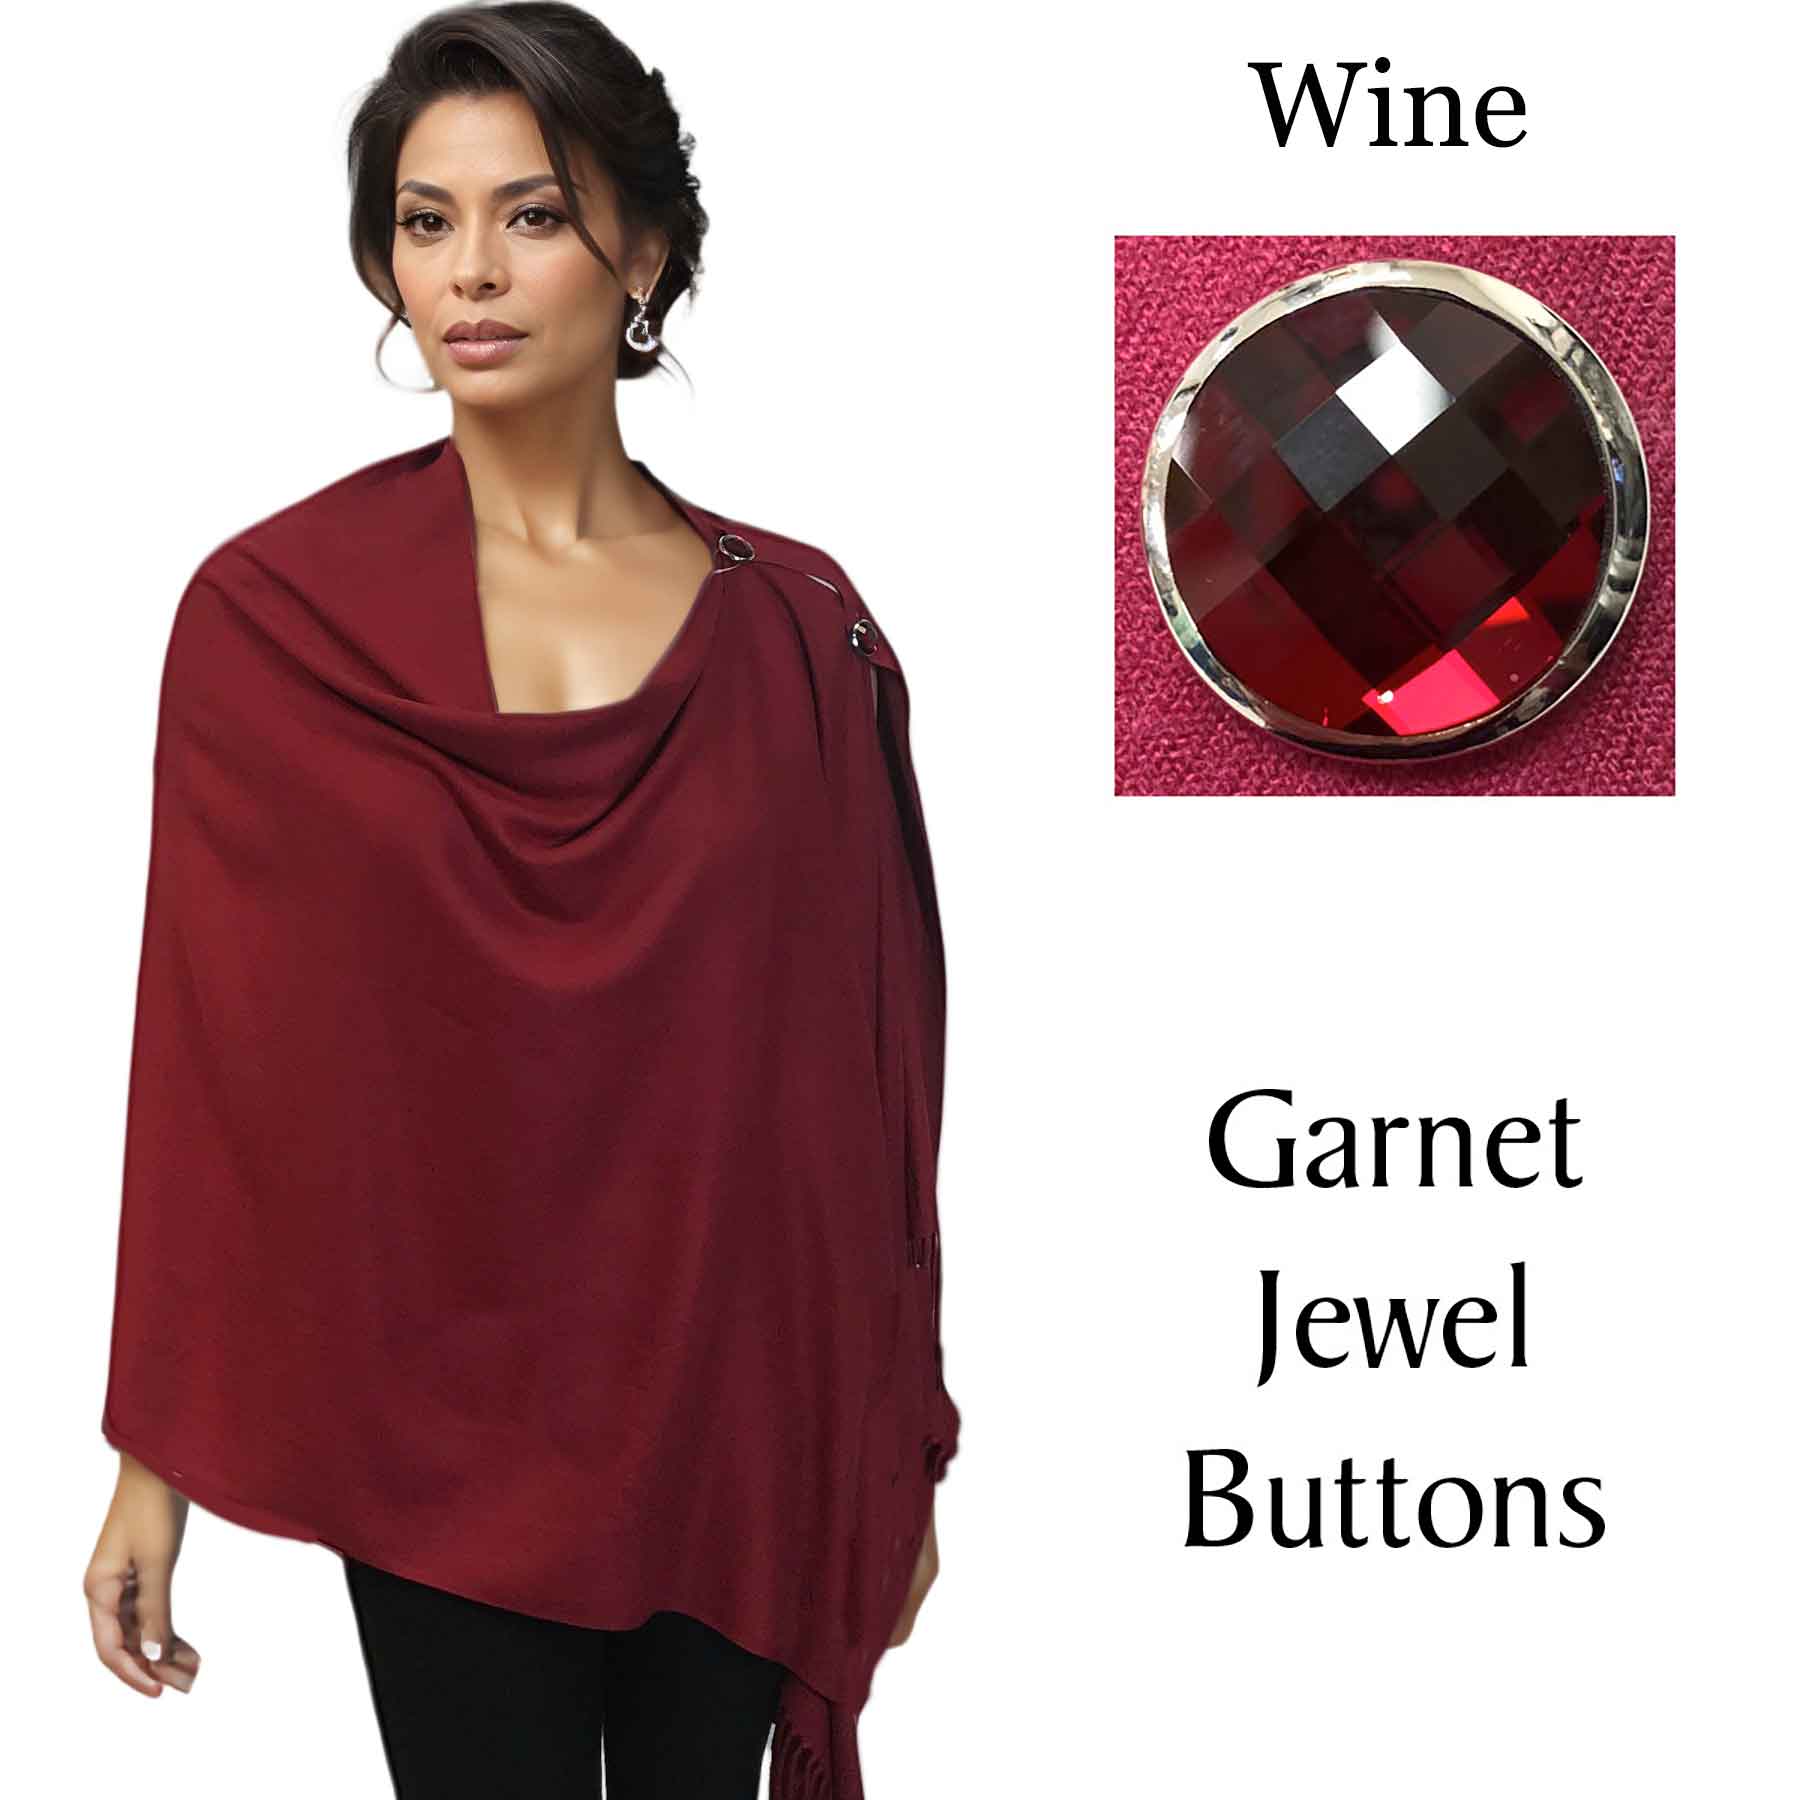 #29 Wine with Garnet Jewel Buttons